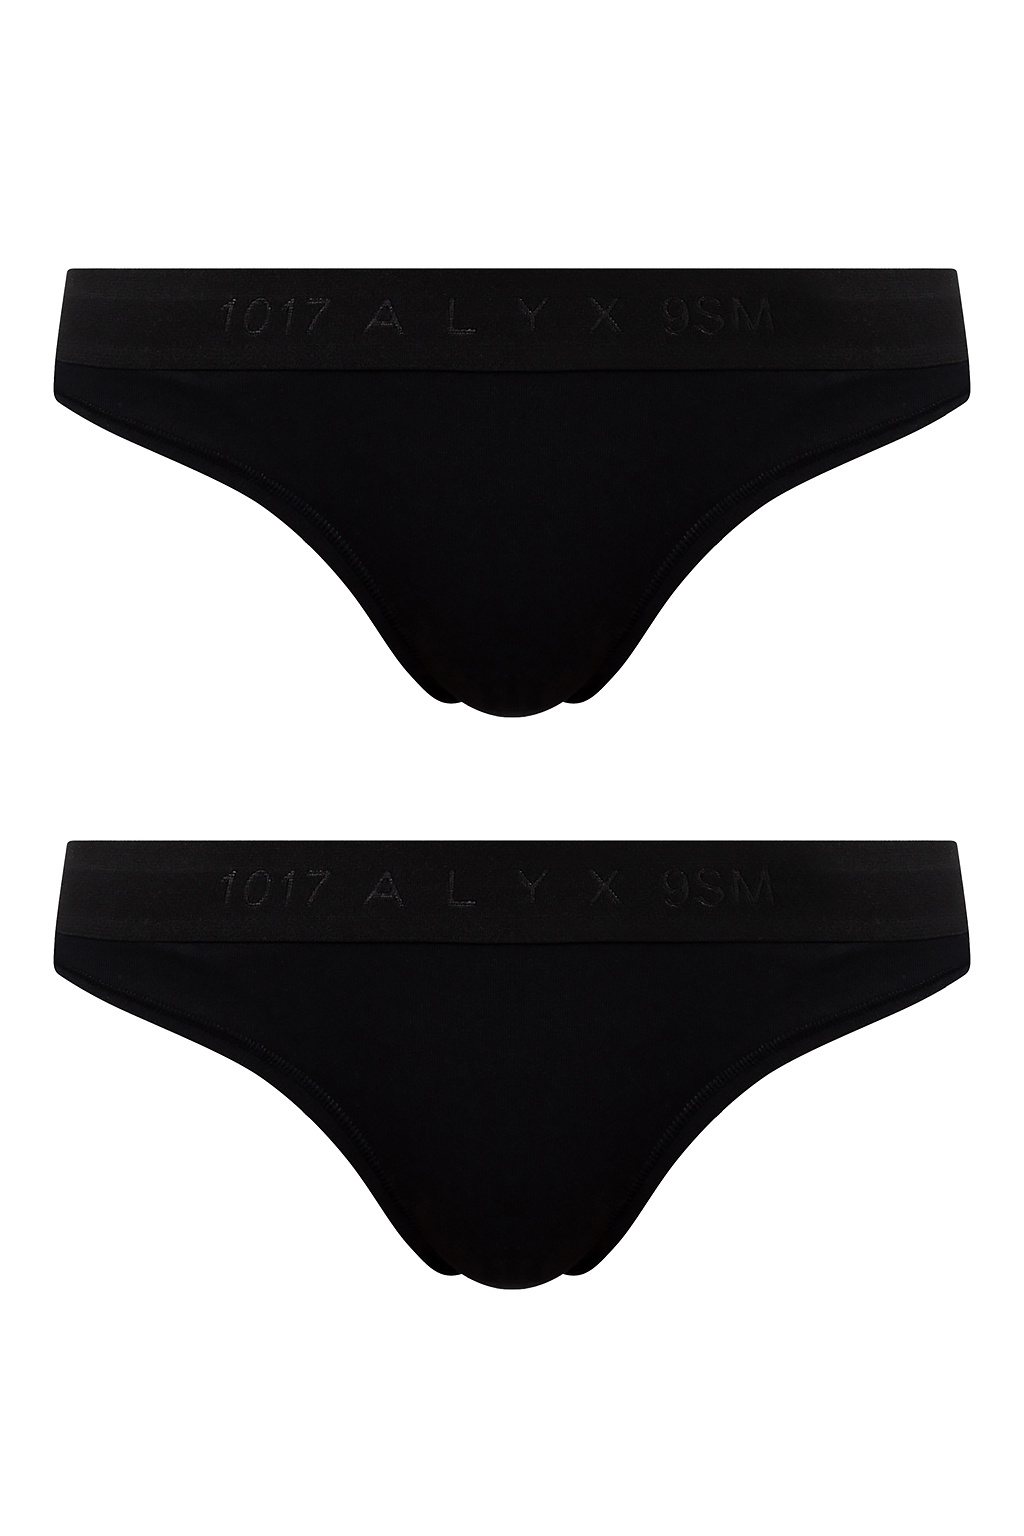 1017 ALYX 9SM Thong with logo 2-pack